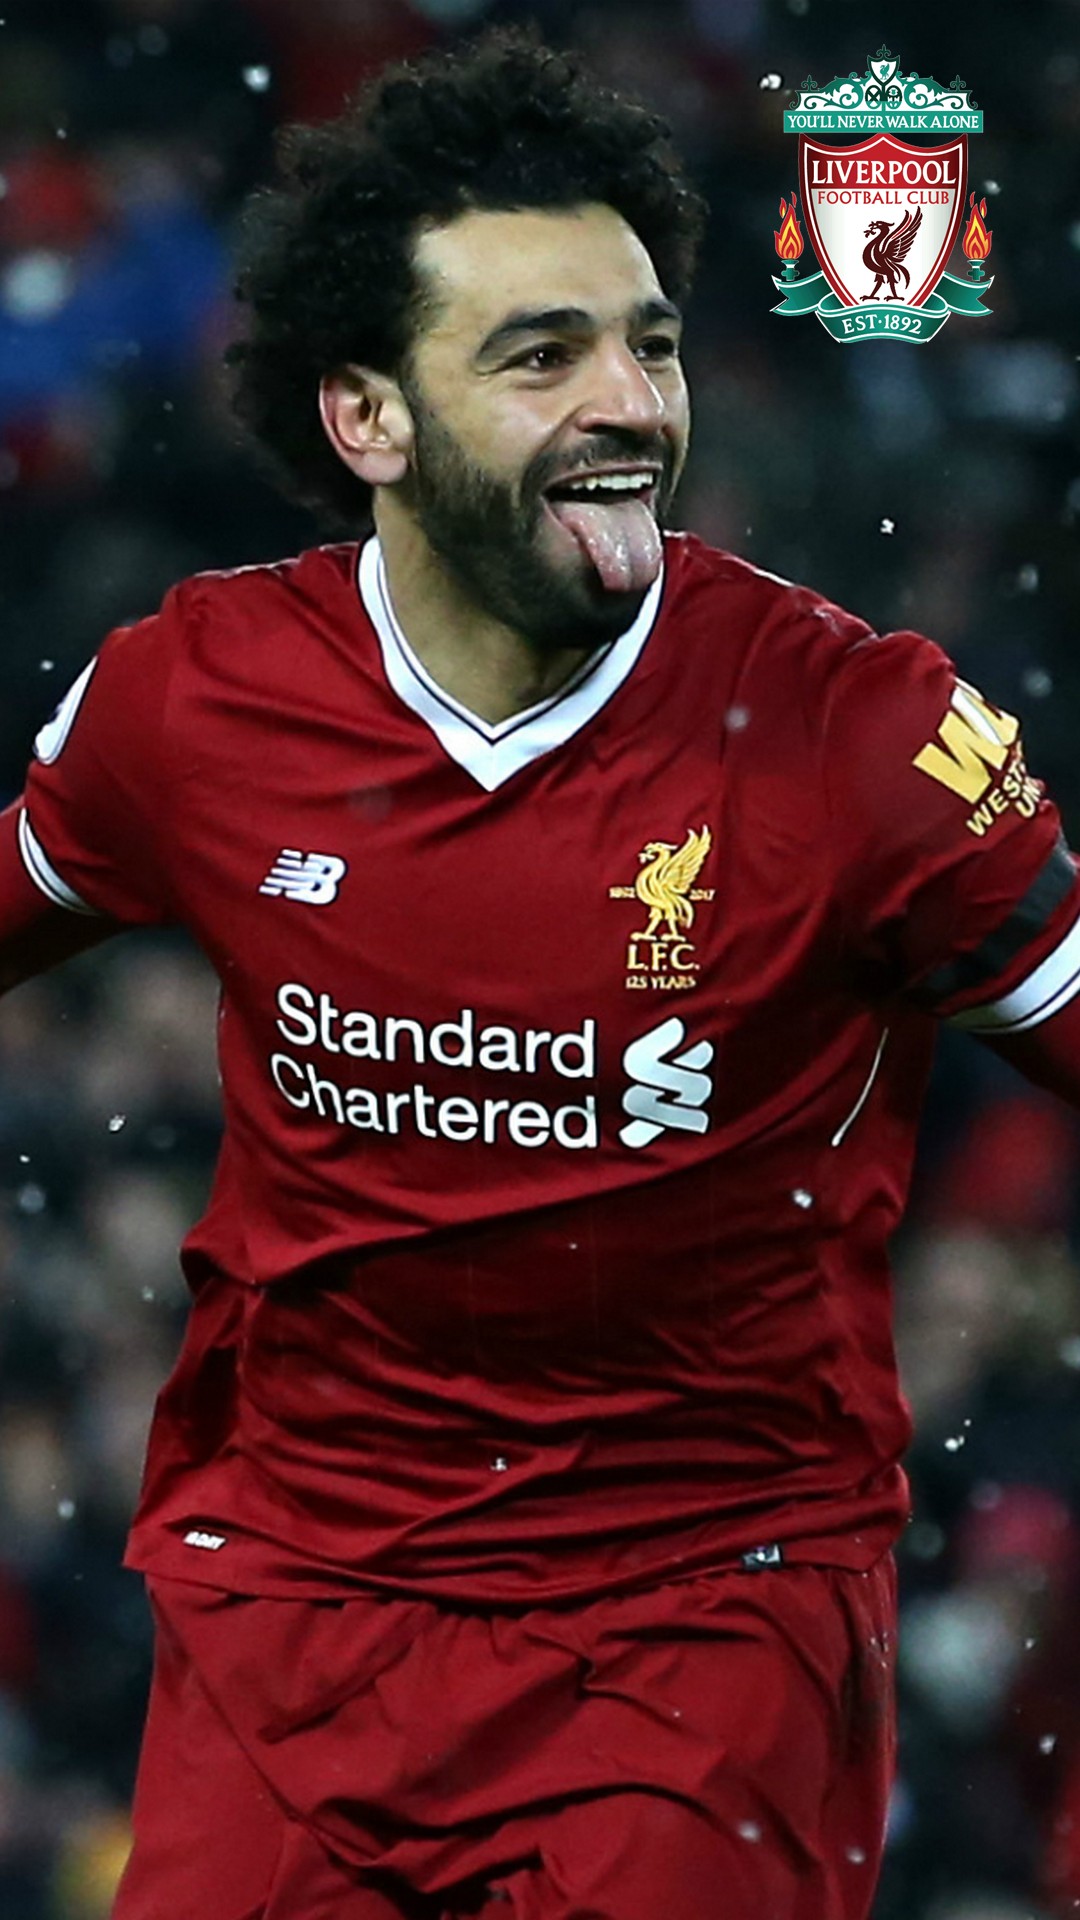 Android Wallpaper Mohamed Salah Liverpool with image resolution 1080x1920 pixel. You can make this wallpaper for your Android backgrounds, Tablet, Smartphones Screensavers and Mobile Phone Lock Screen